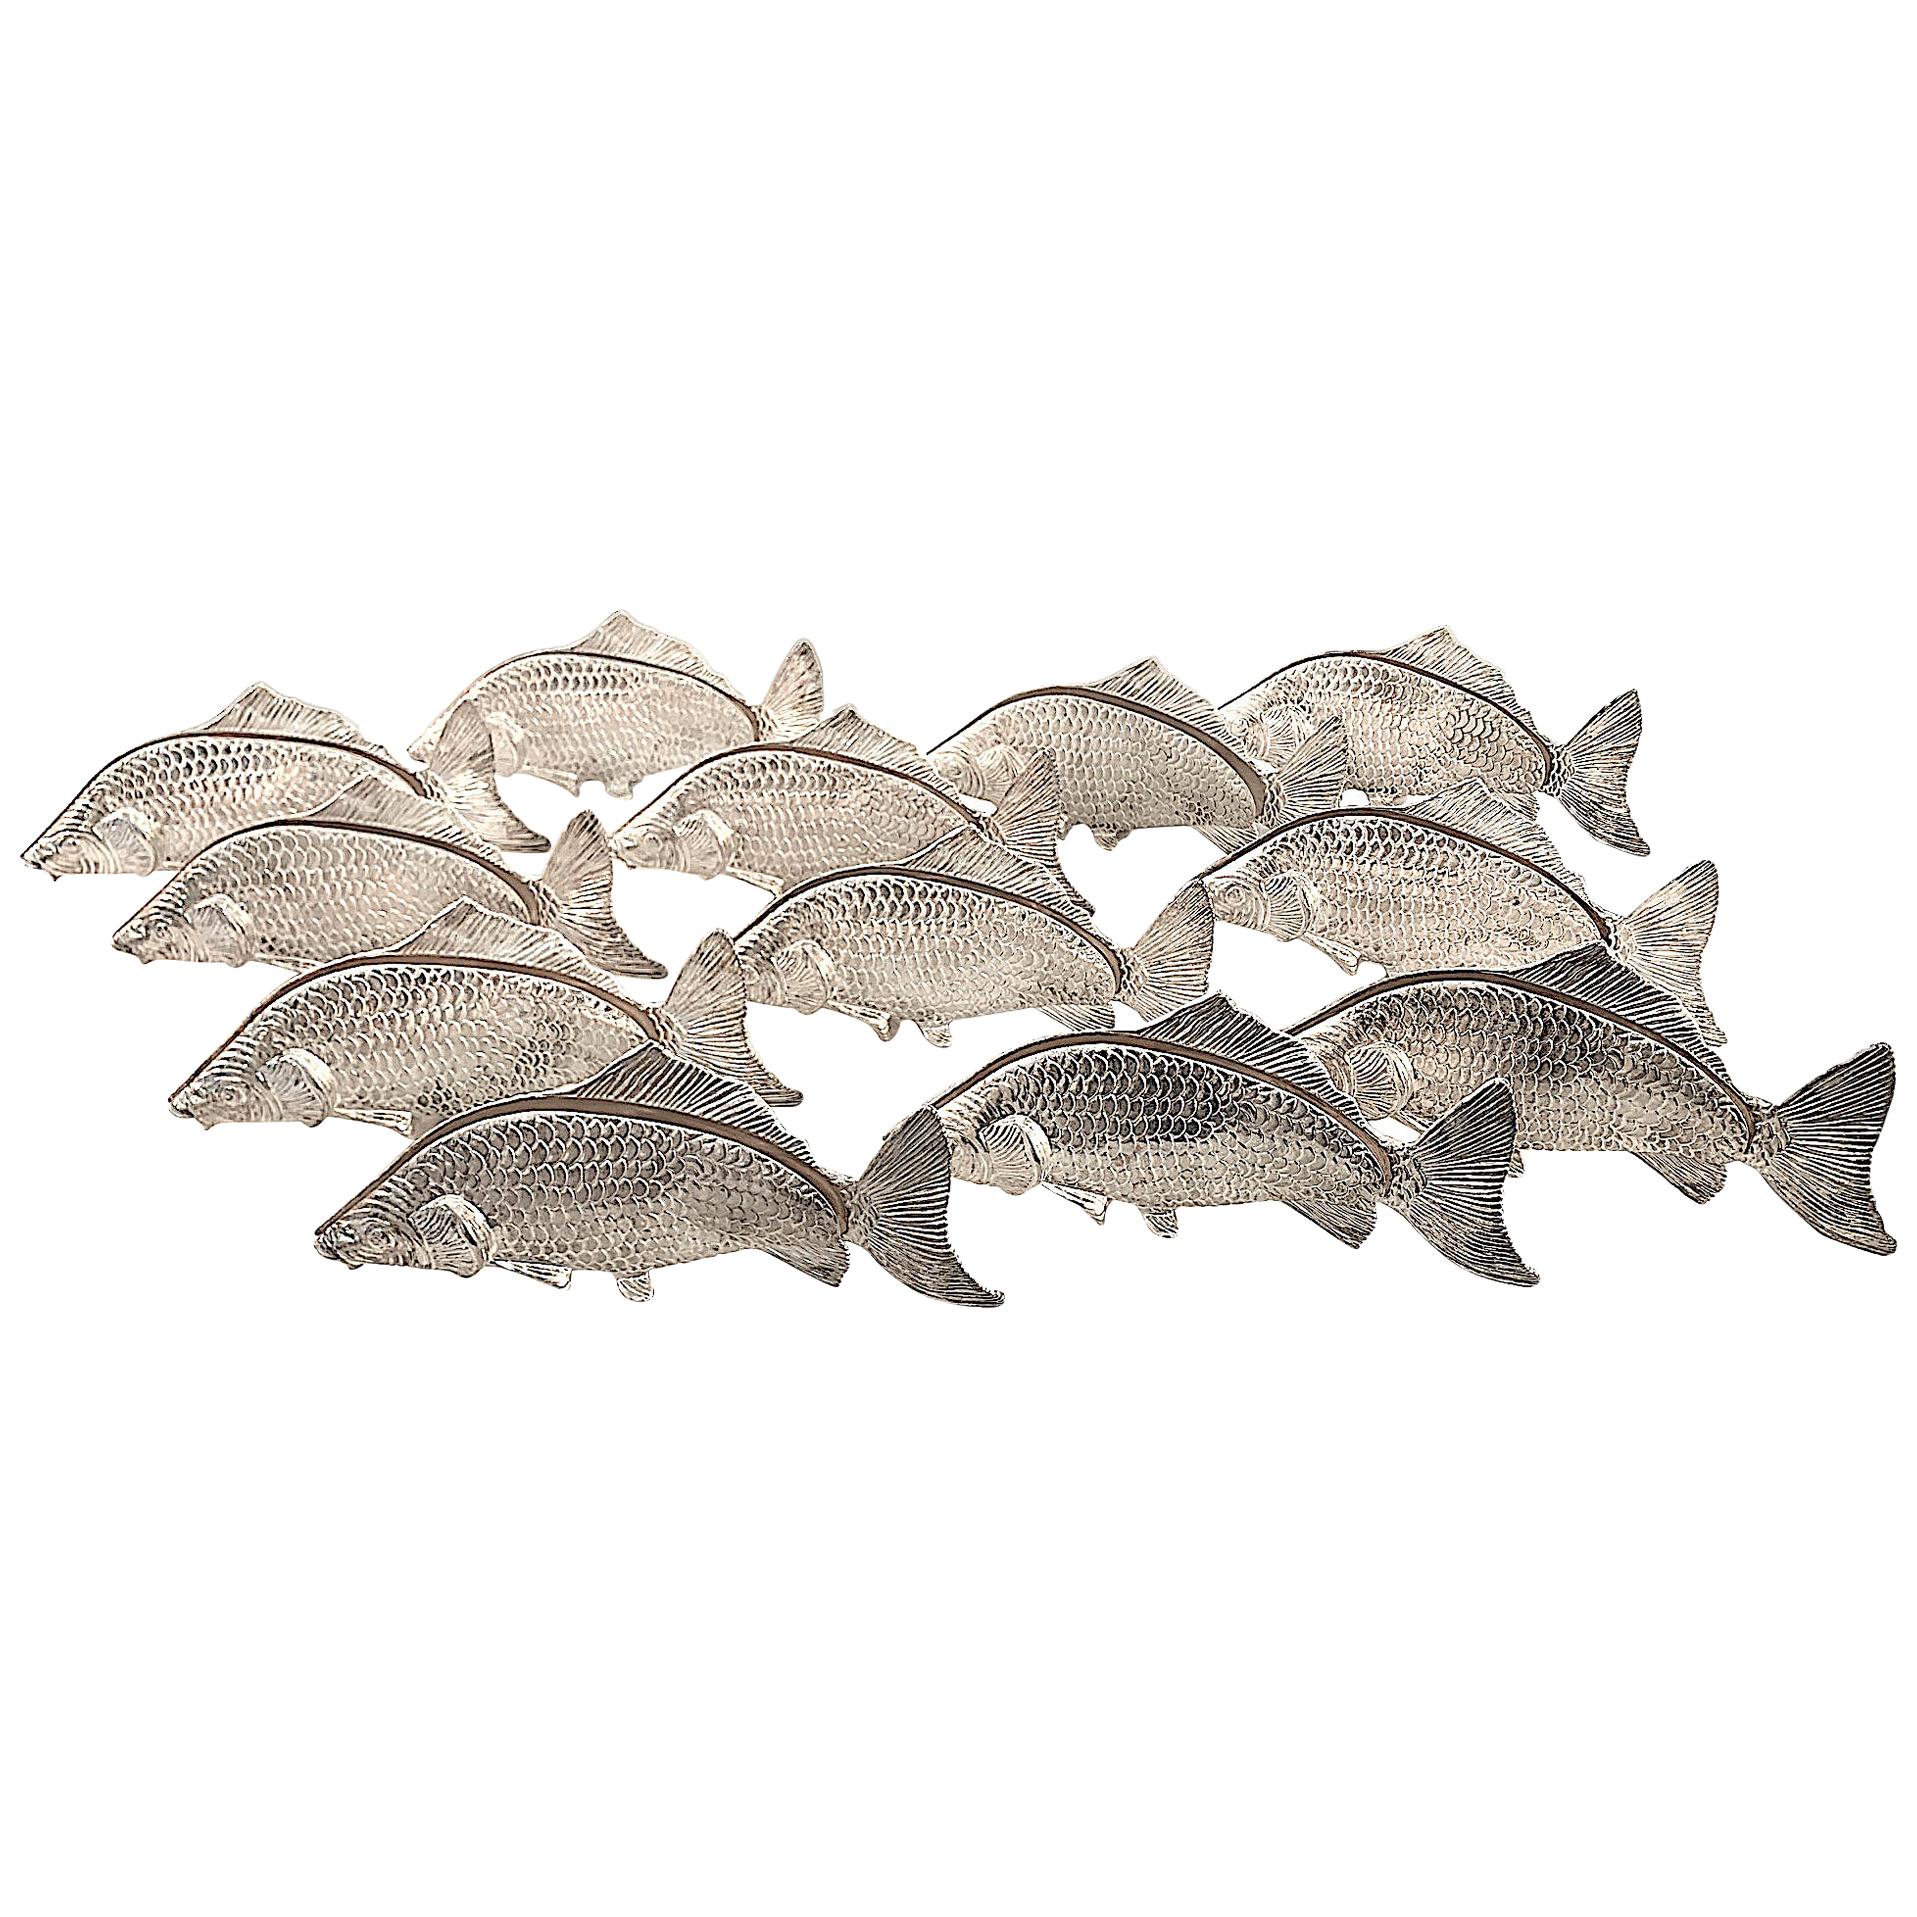 Unique Set of 12 Italian 1950s Silver Plated Fish Menu or Name Card Holders